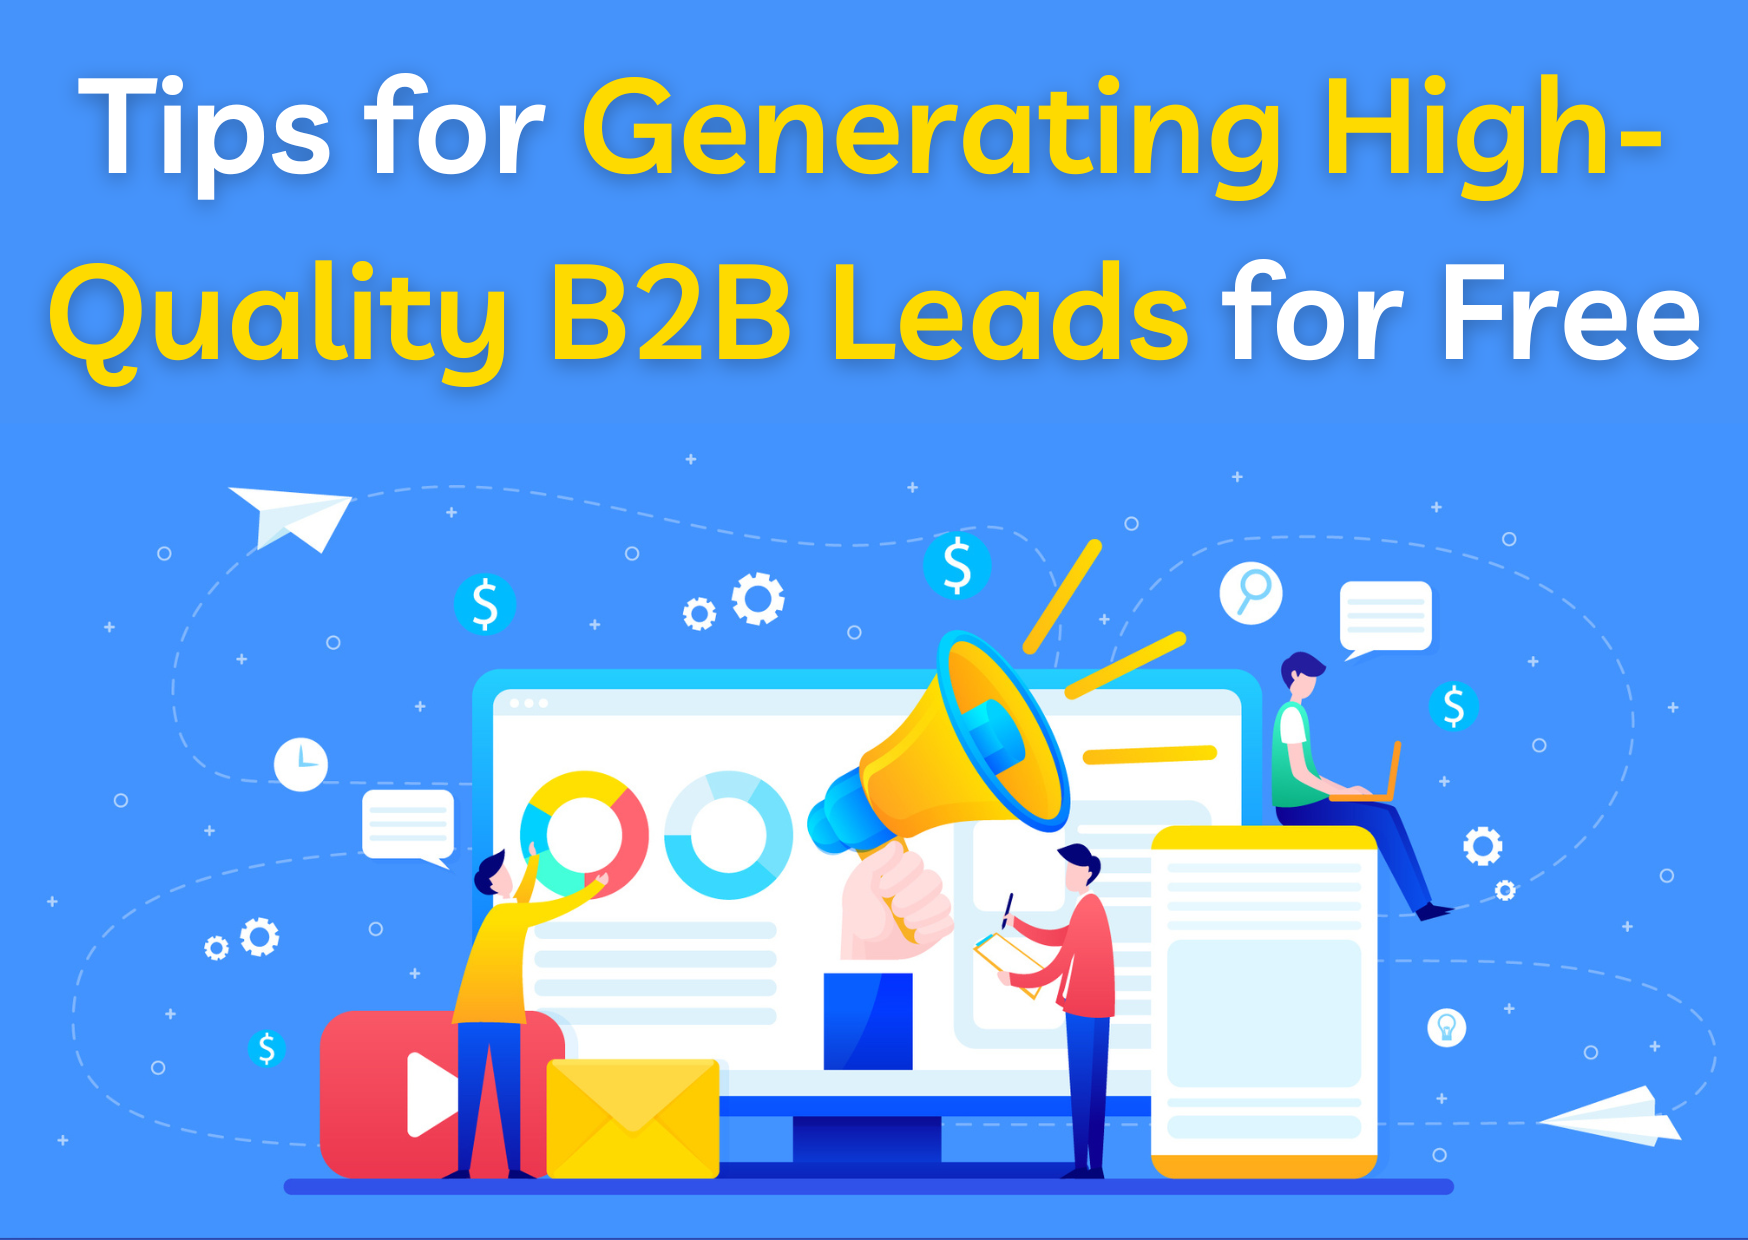 Tips for Generating High-Quality B2B Leads for Free